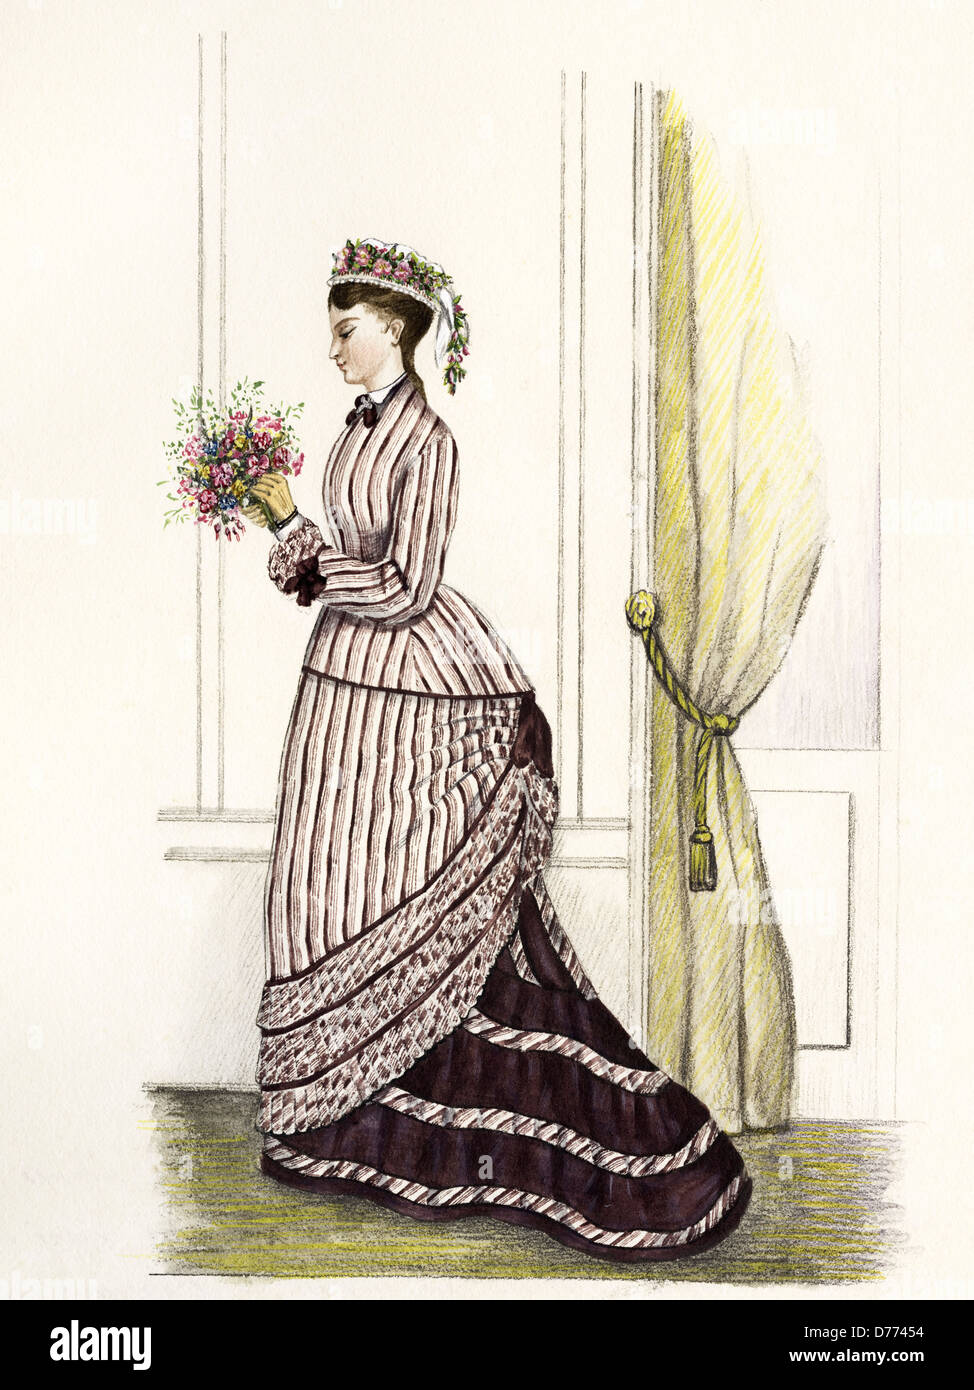 French fashion from the Victorian era dated 1875. Original watercolour painting artist unknown Stock Photo